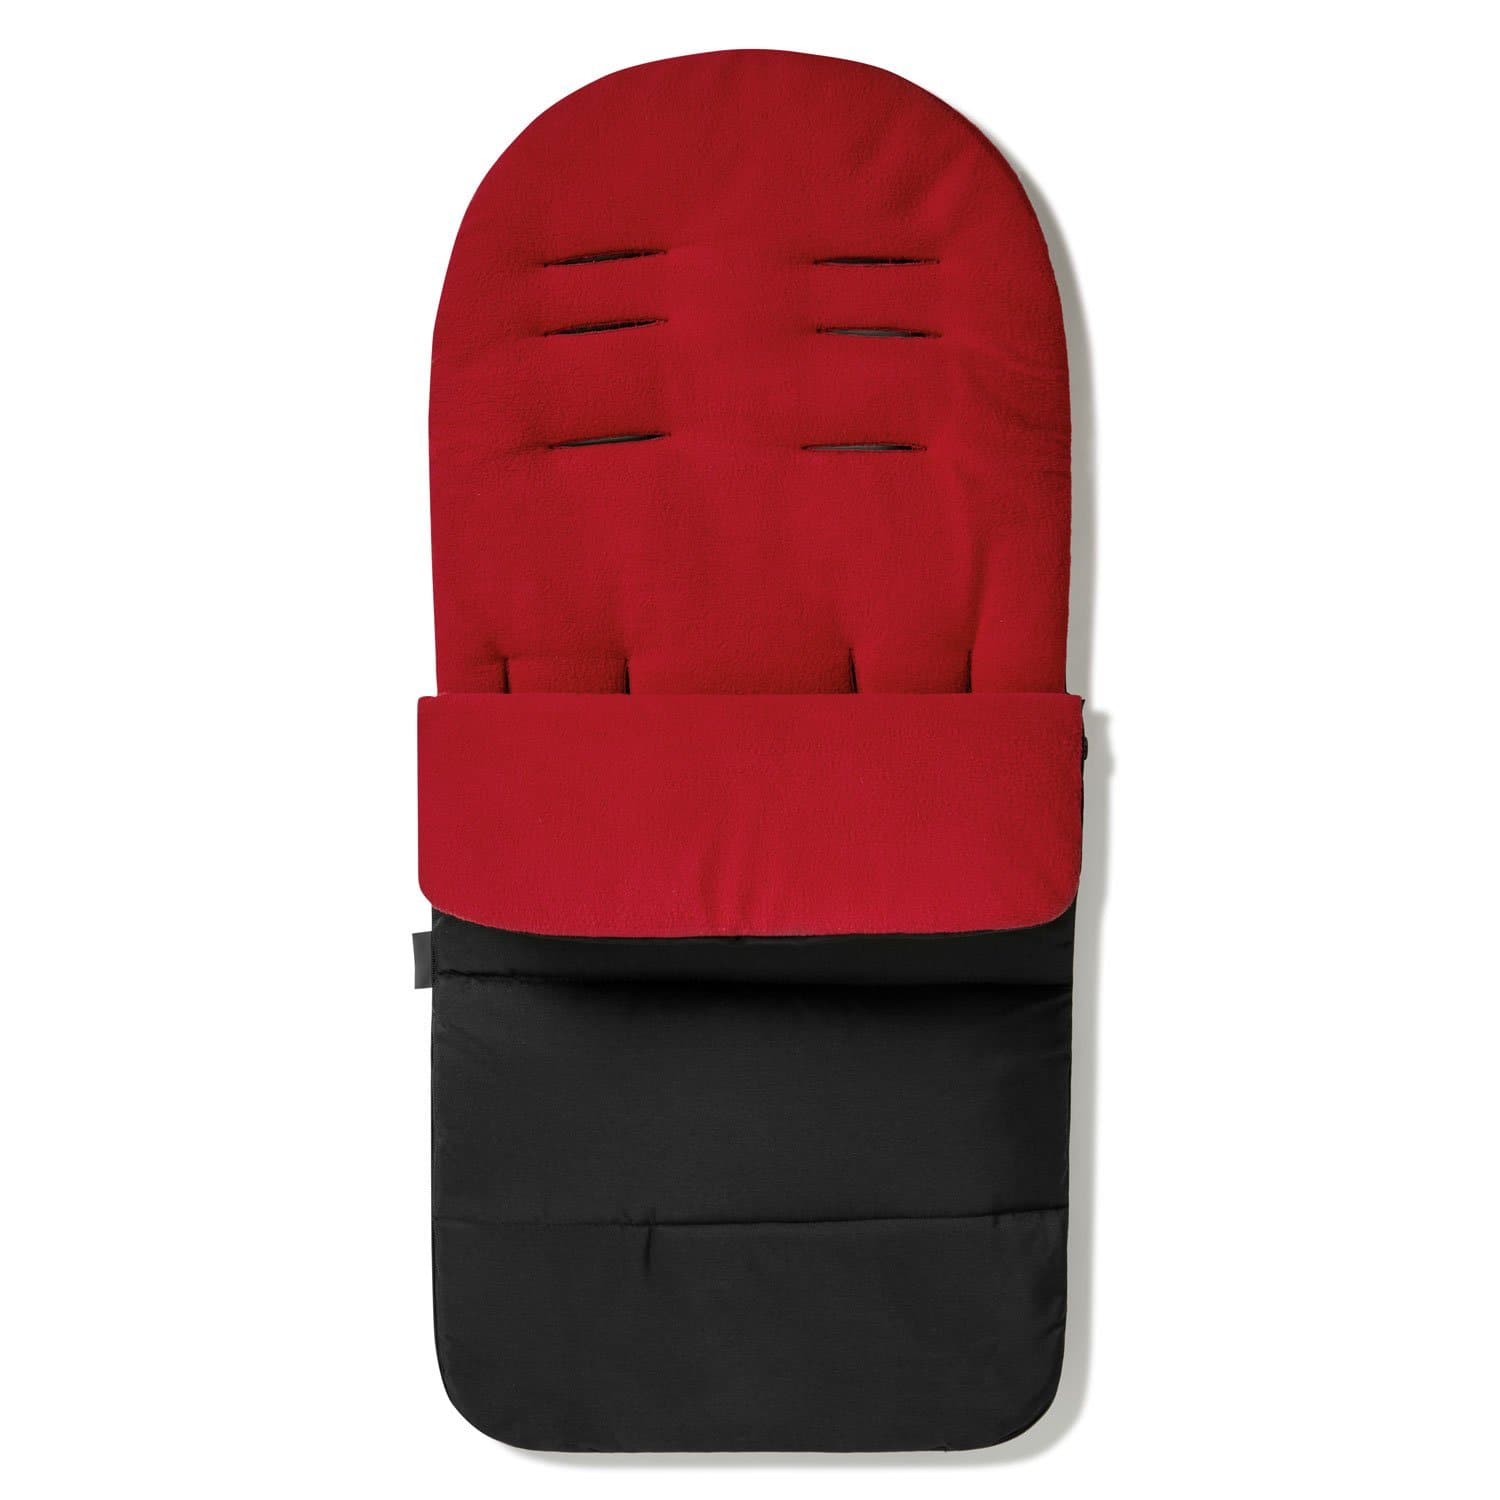 Premium Footmuff / Cosy Toes Compatible with Bebecar - Fire Red / Fits All Models | For Your Little One